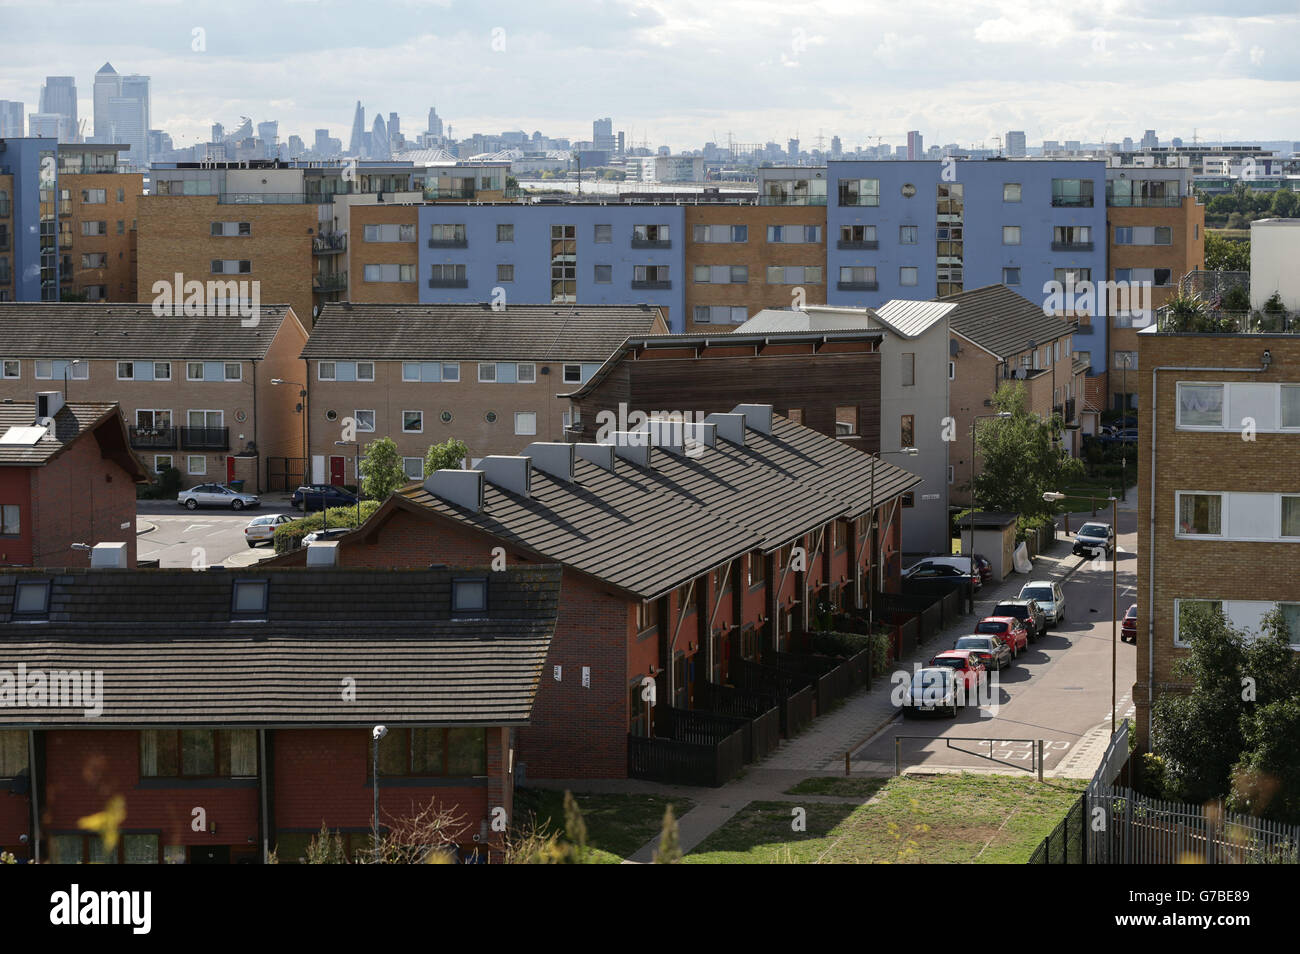 House prices. A view of houses in Thamesmead, south east London. Stock Photo